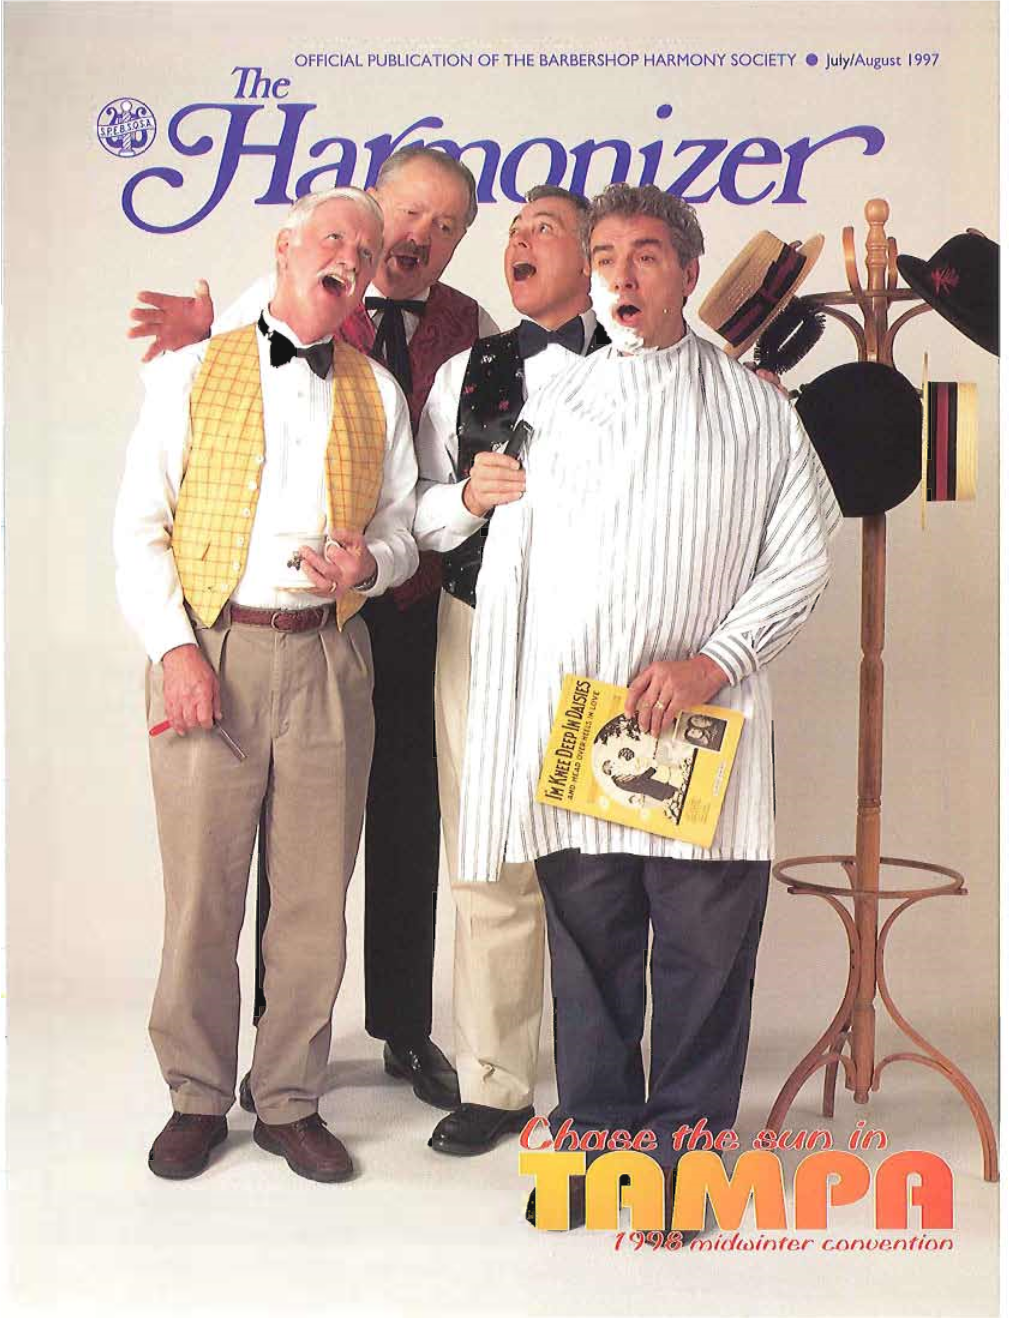 OFFICIAL PUBLICATION of the BARBERSHOP HARMONY SOCIETY • July/August 1997